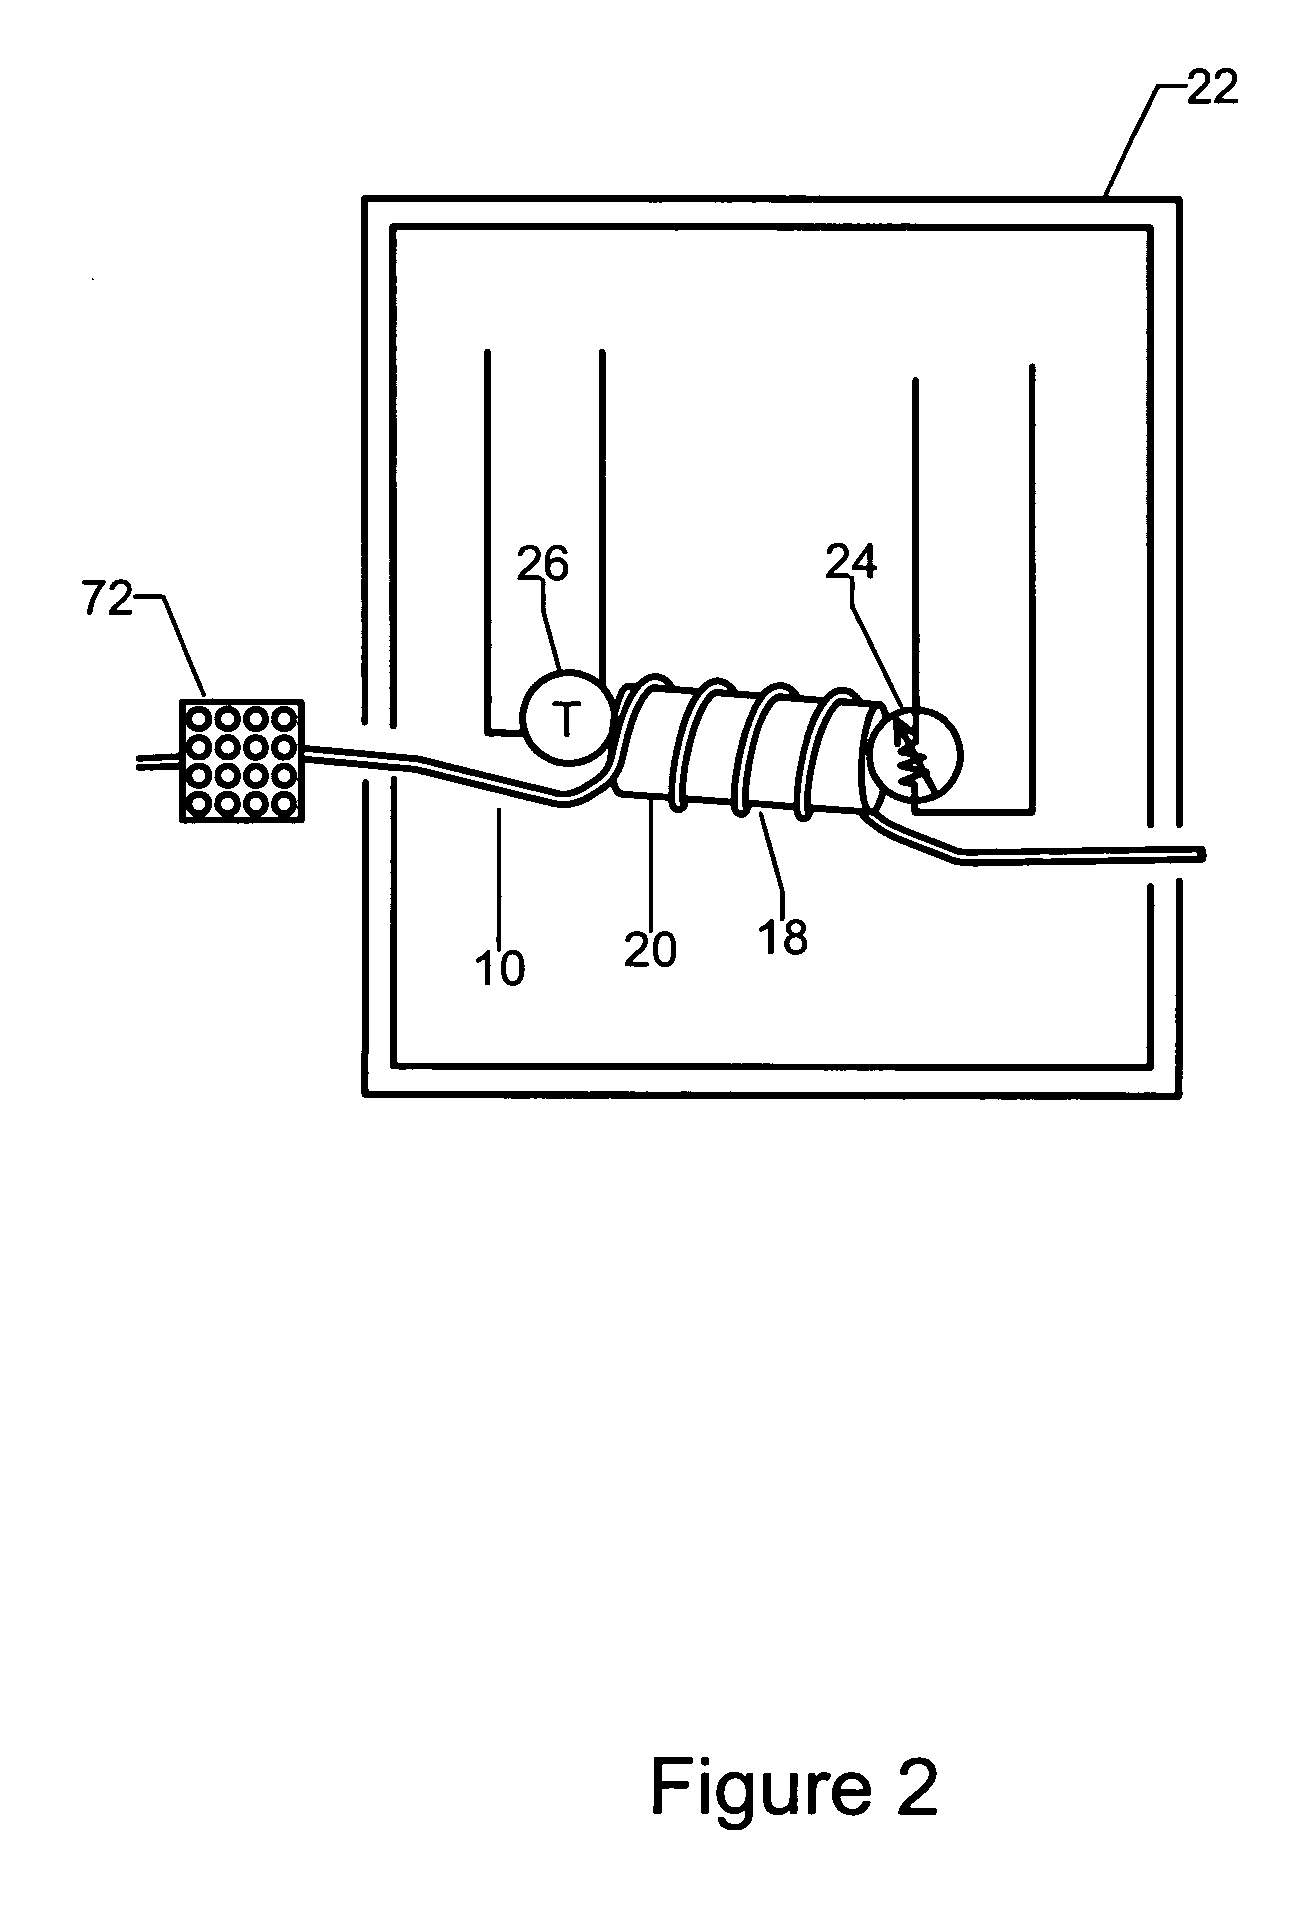 Automatic bridge balancing means and method for a capillary bridge viscometer